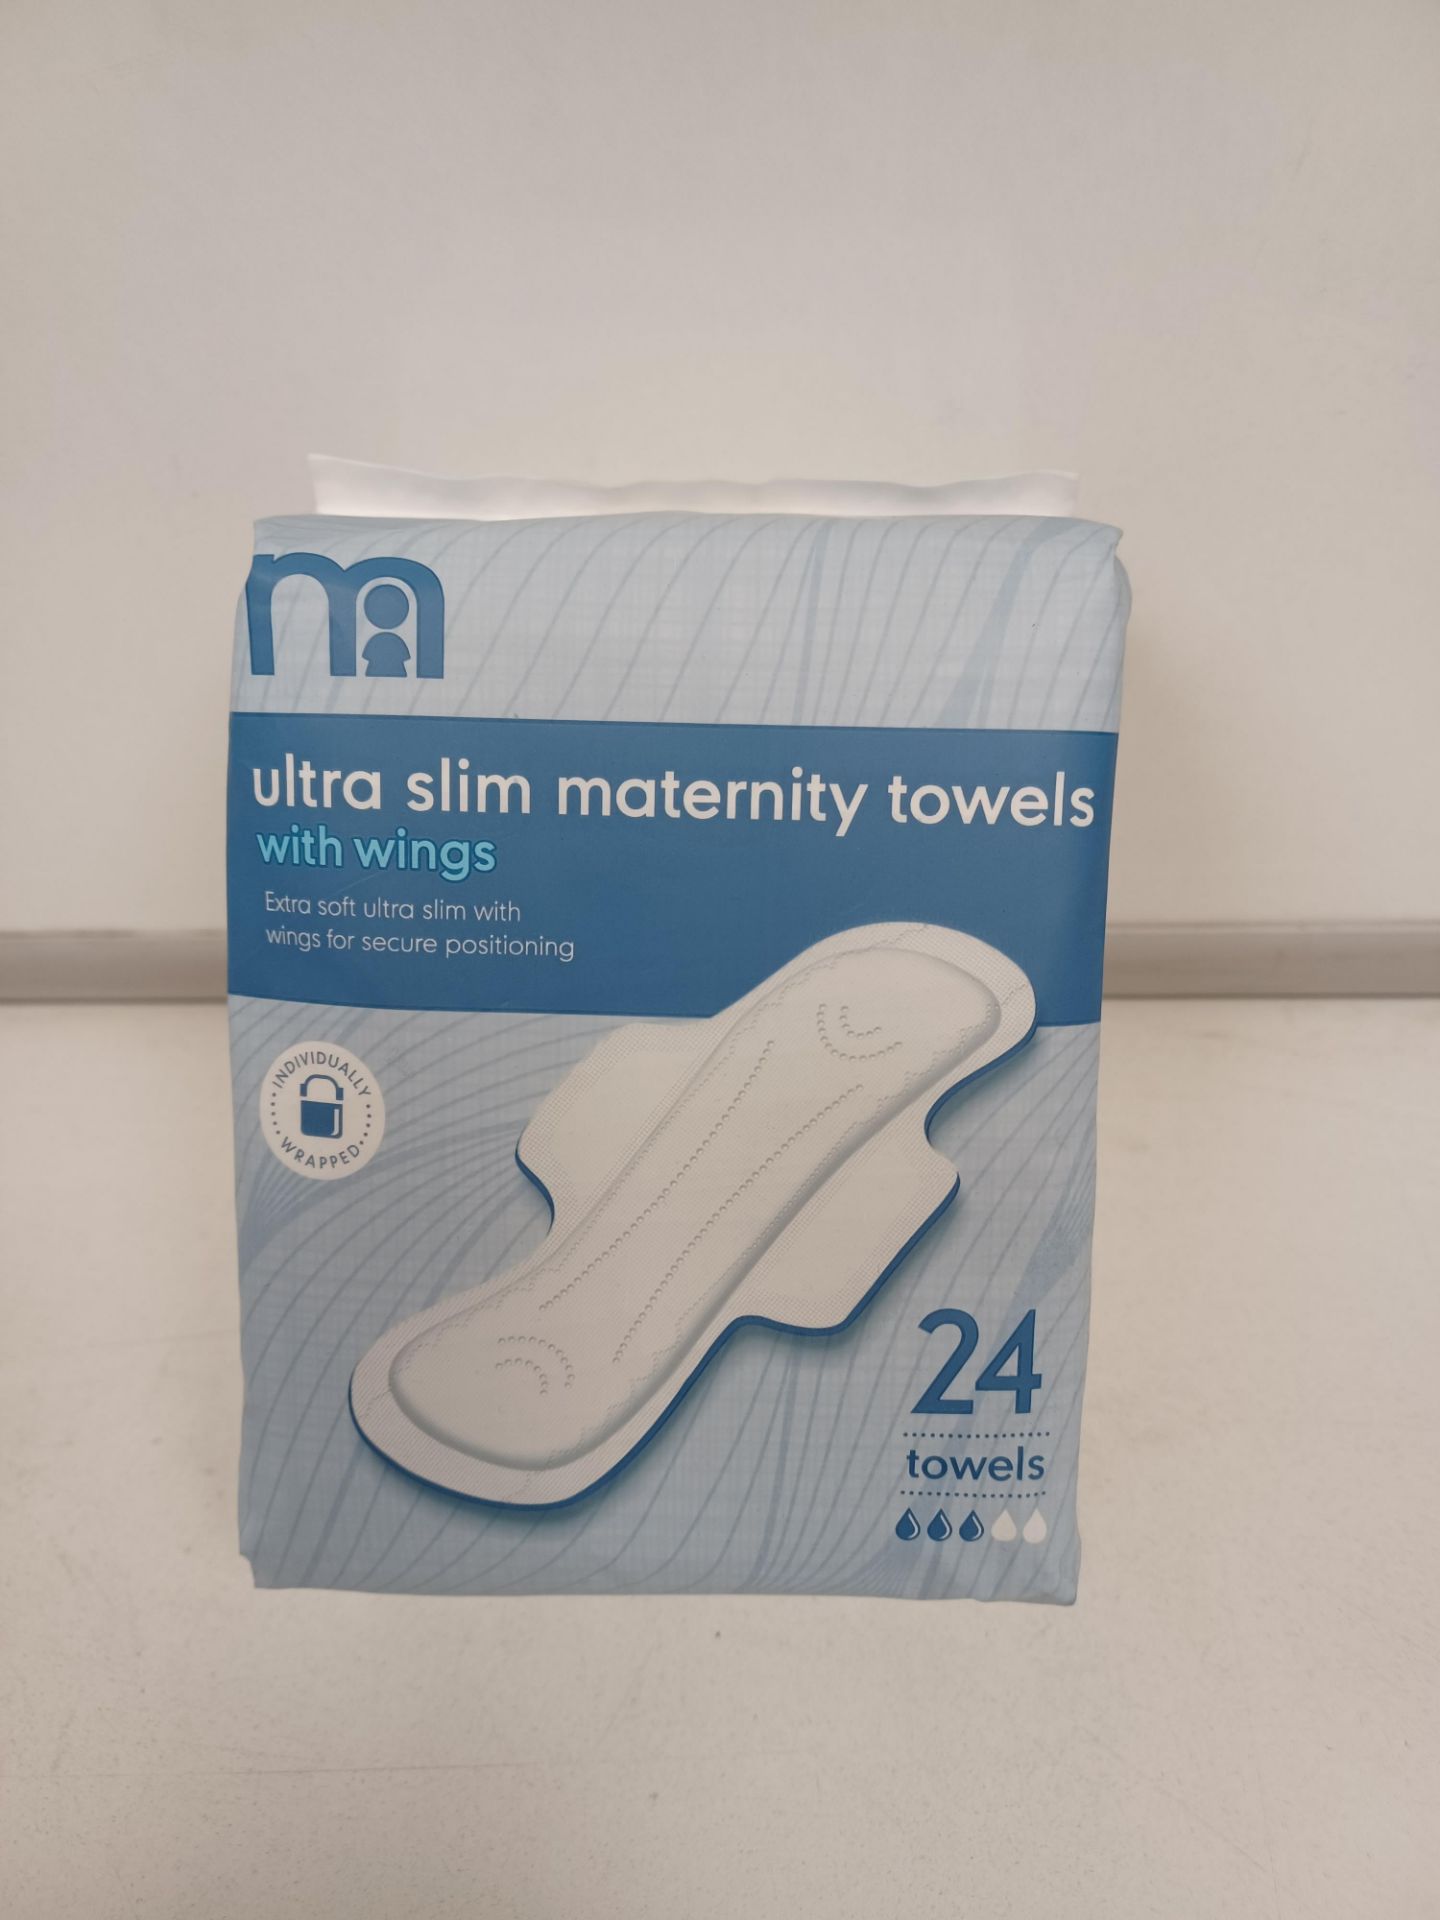 (NO VAT) 48 X NEW SEALED PACKS OF MOTHERCARE ULTRA SLIM MATERNITY TOWELS WITH WINGS (24 PER PACK).